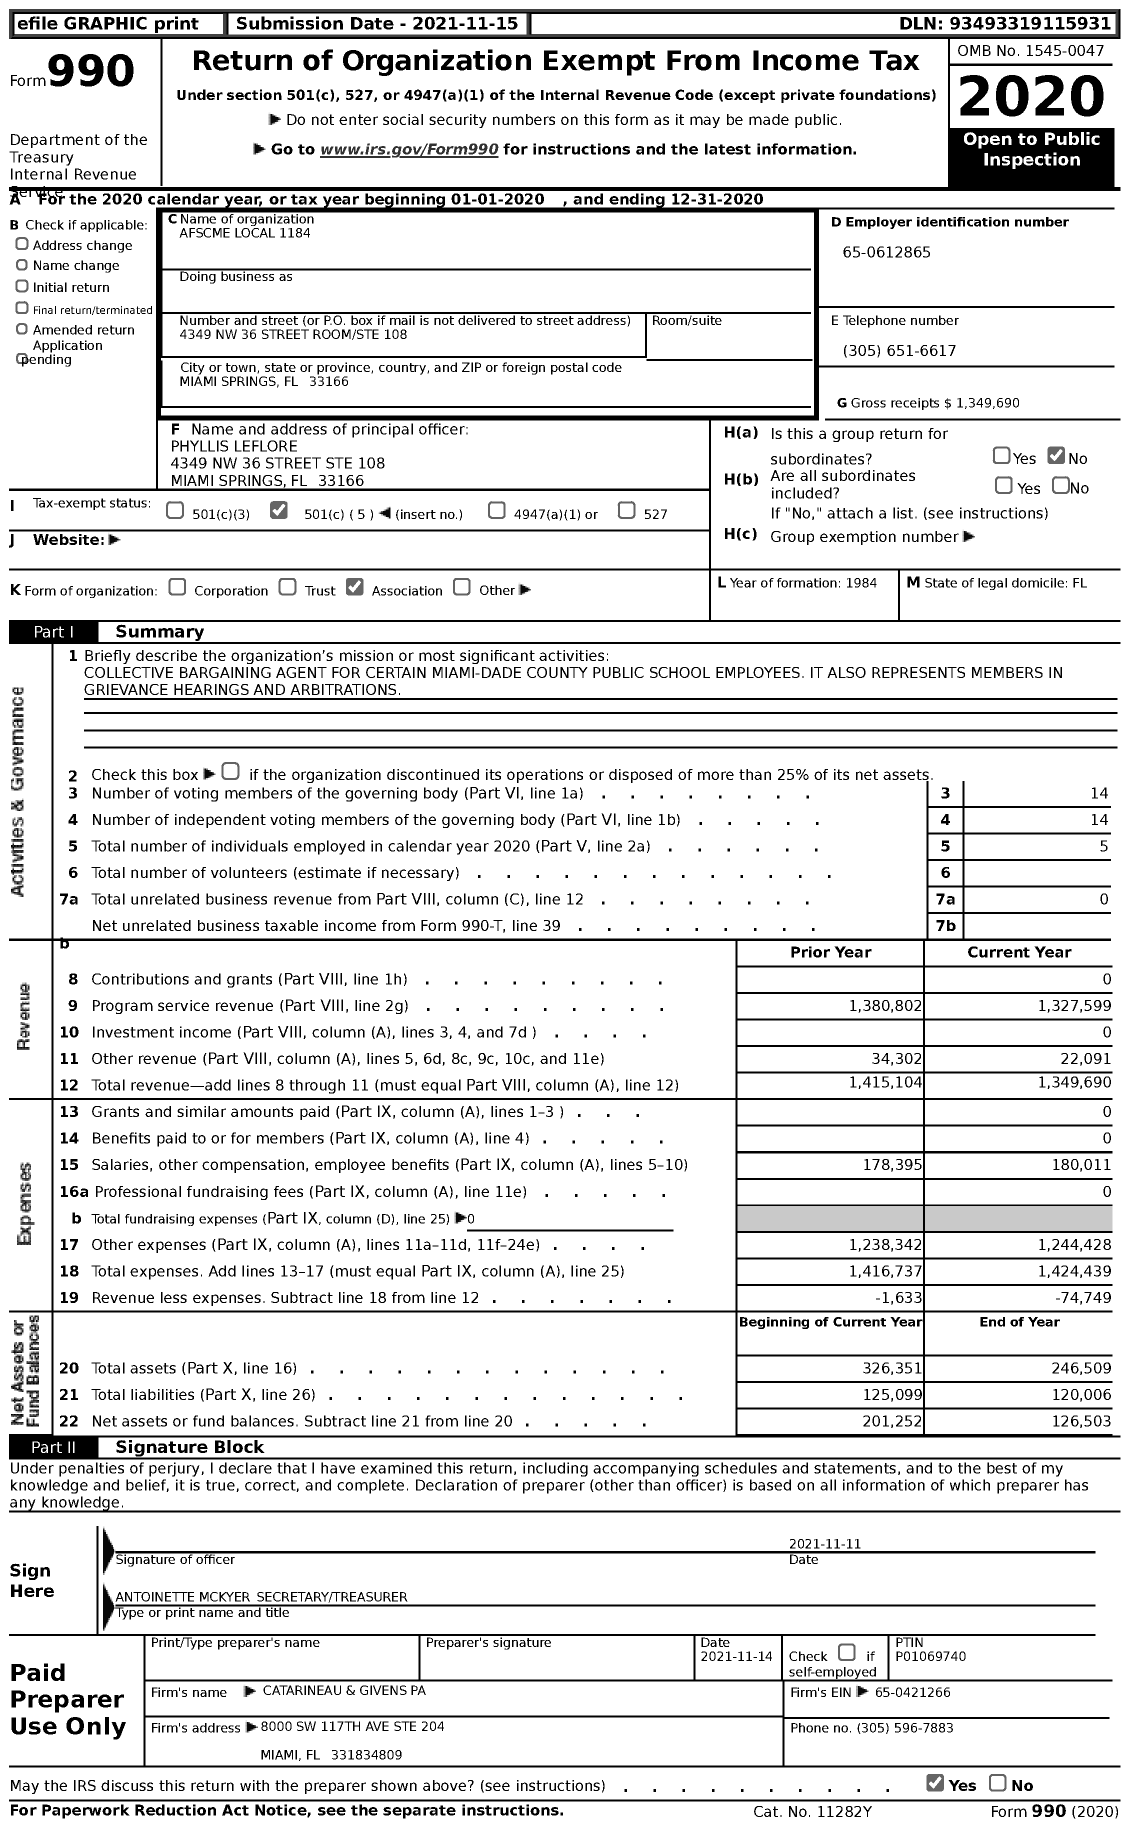 Image of first page of 2020 Form 990 for American Federation of State County & Municipal Employees - L1184FL Dade Co Fla School BD Emps